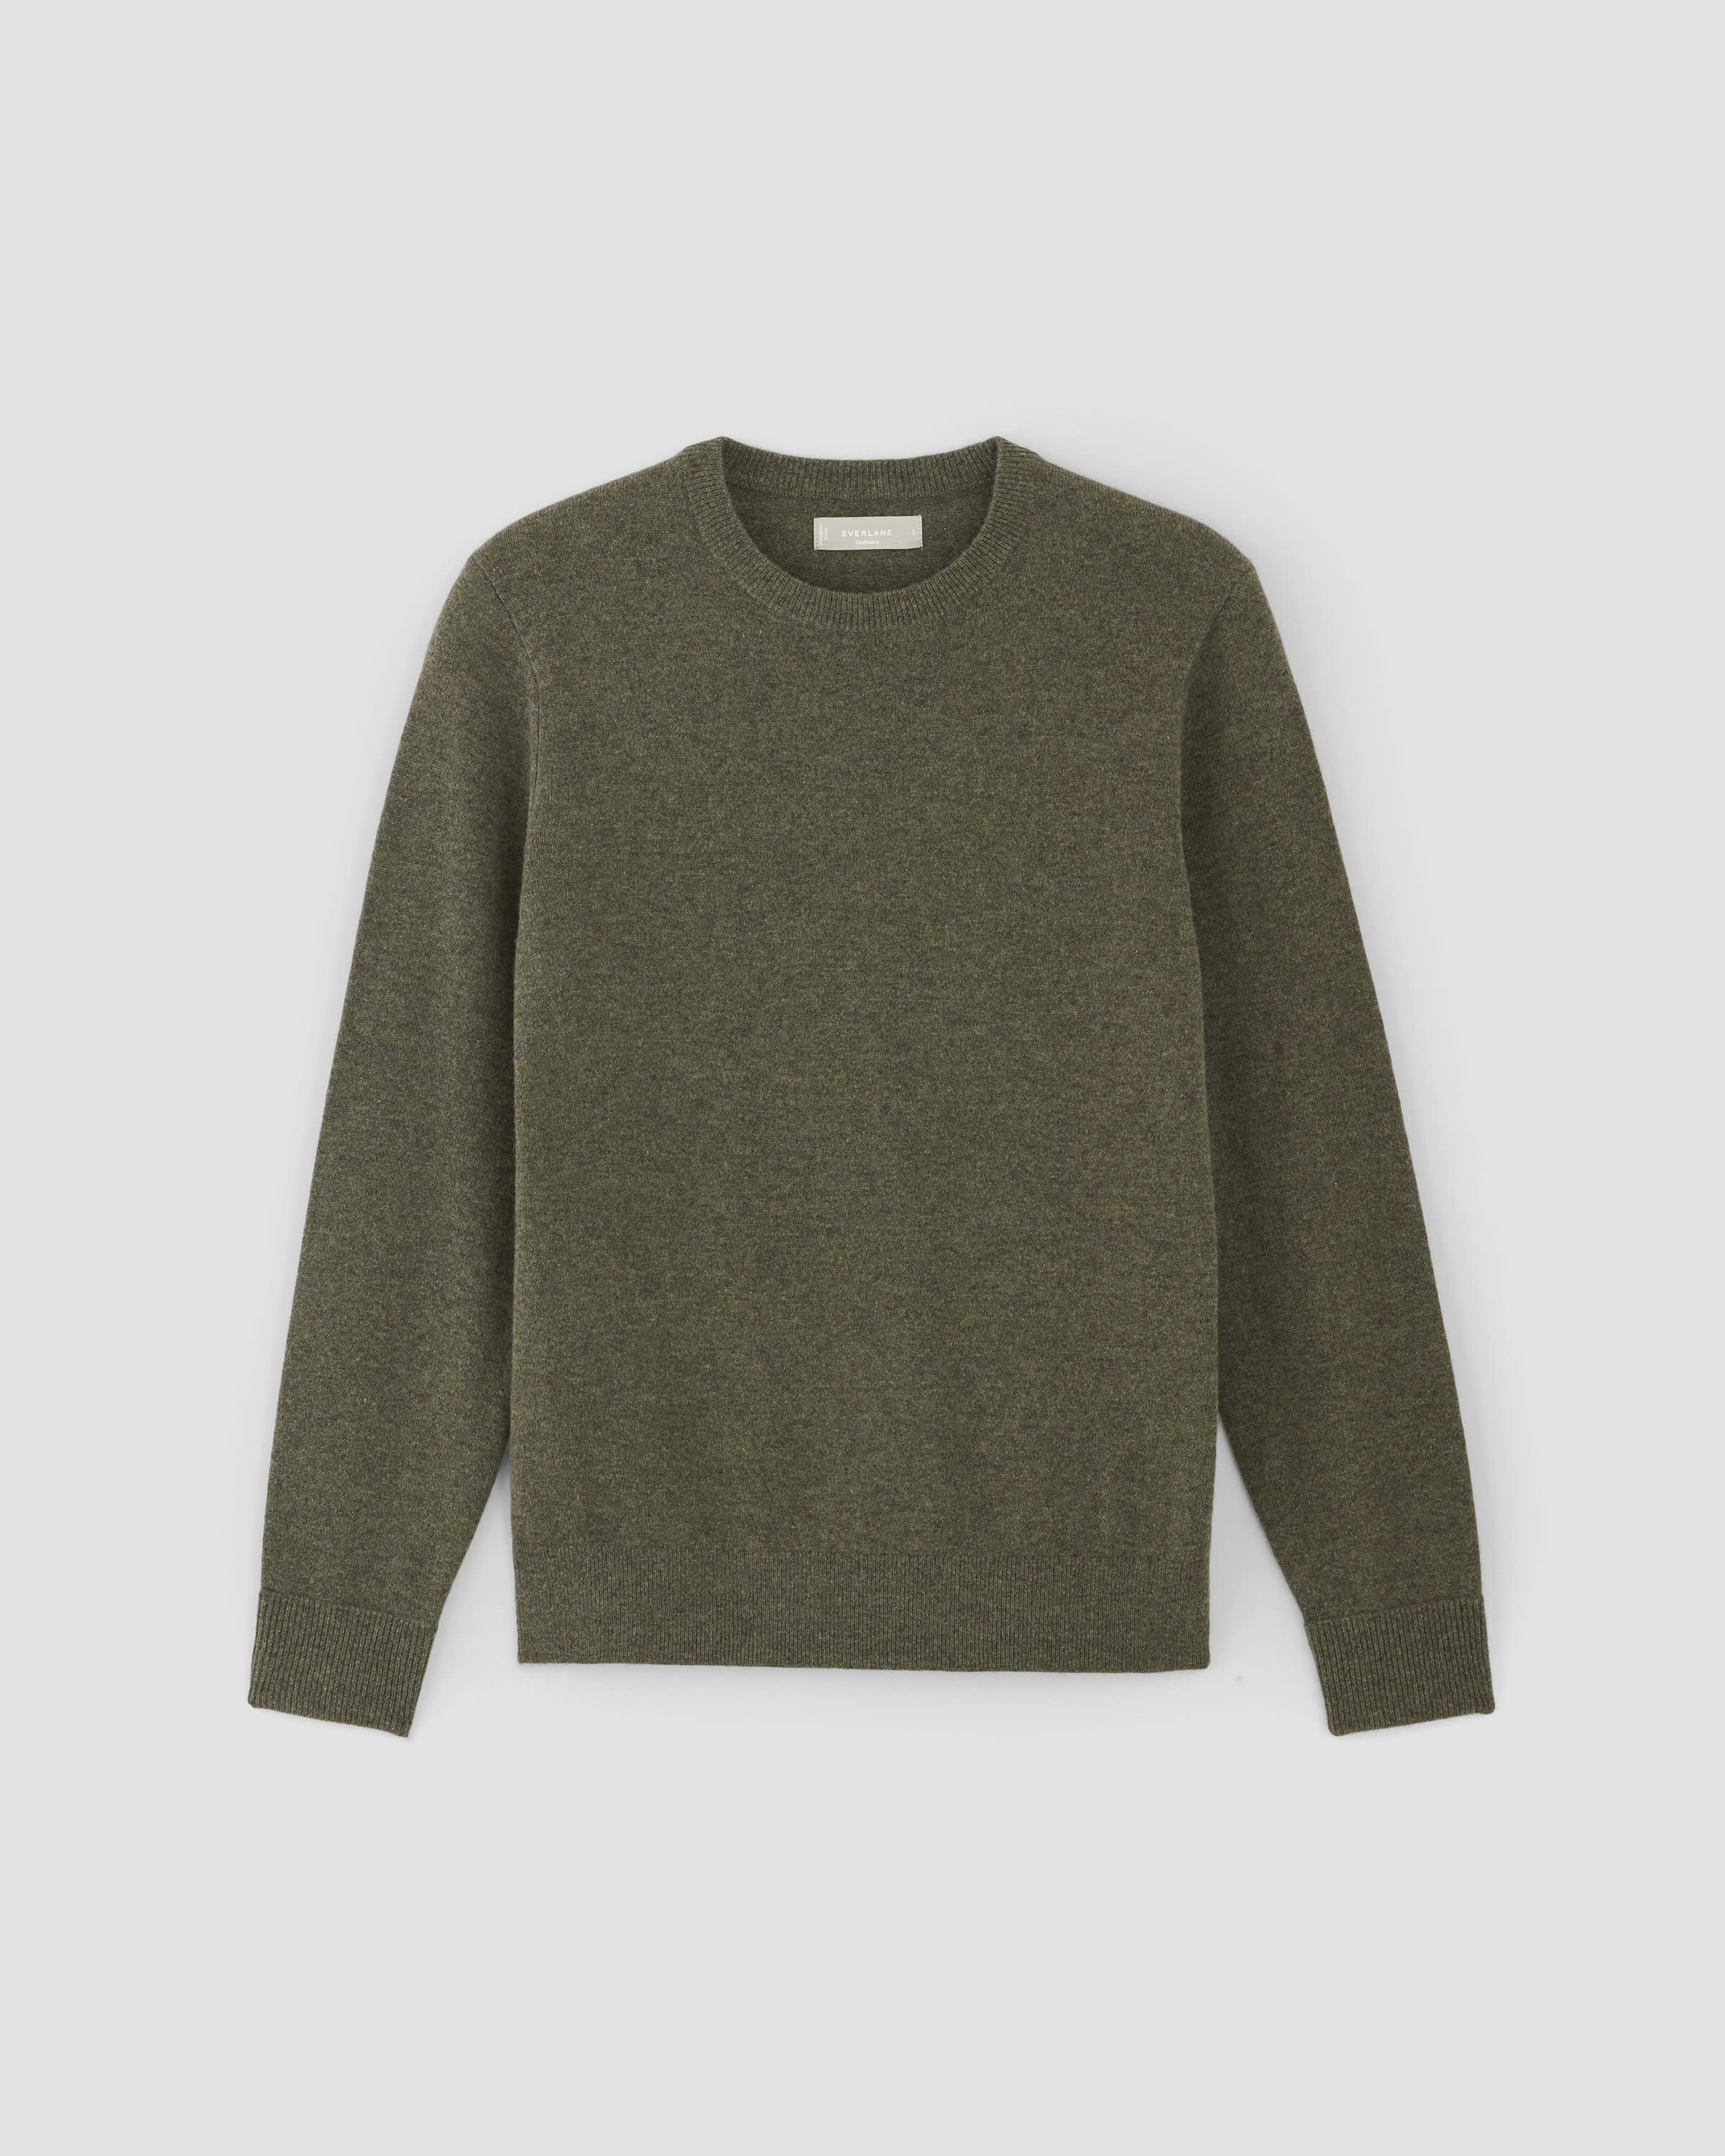 Everlane Men's Grade-a Cashmere Crew Neck Sweater in Heathered Grey, Size Extra Small